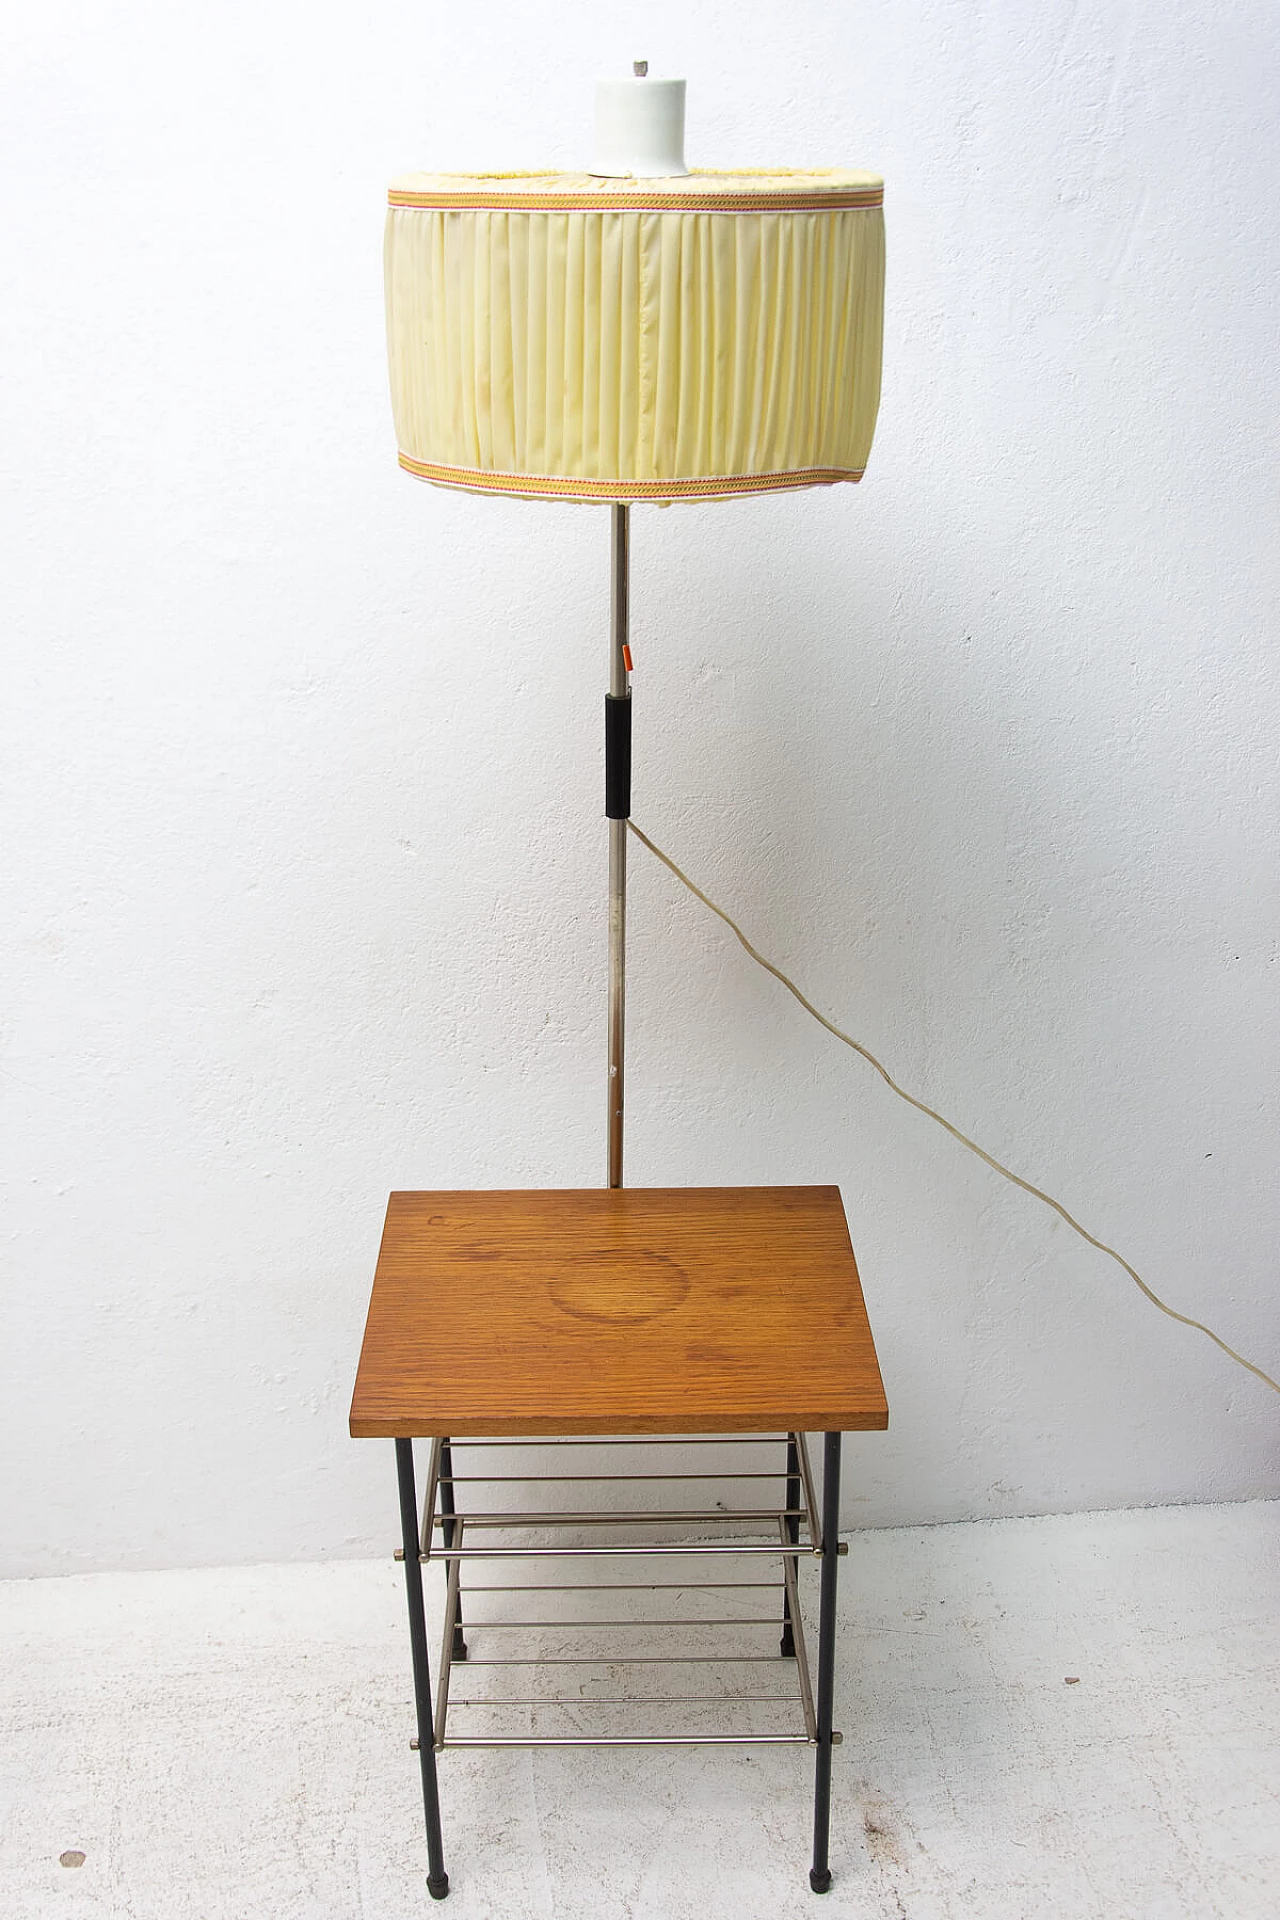 Floor lamp with storage compartment, 1970s 1364360